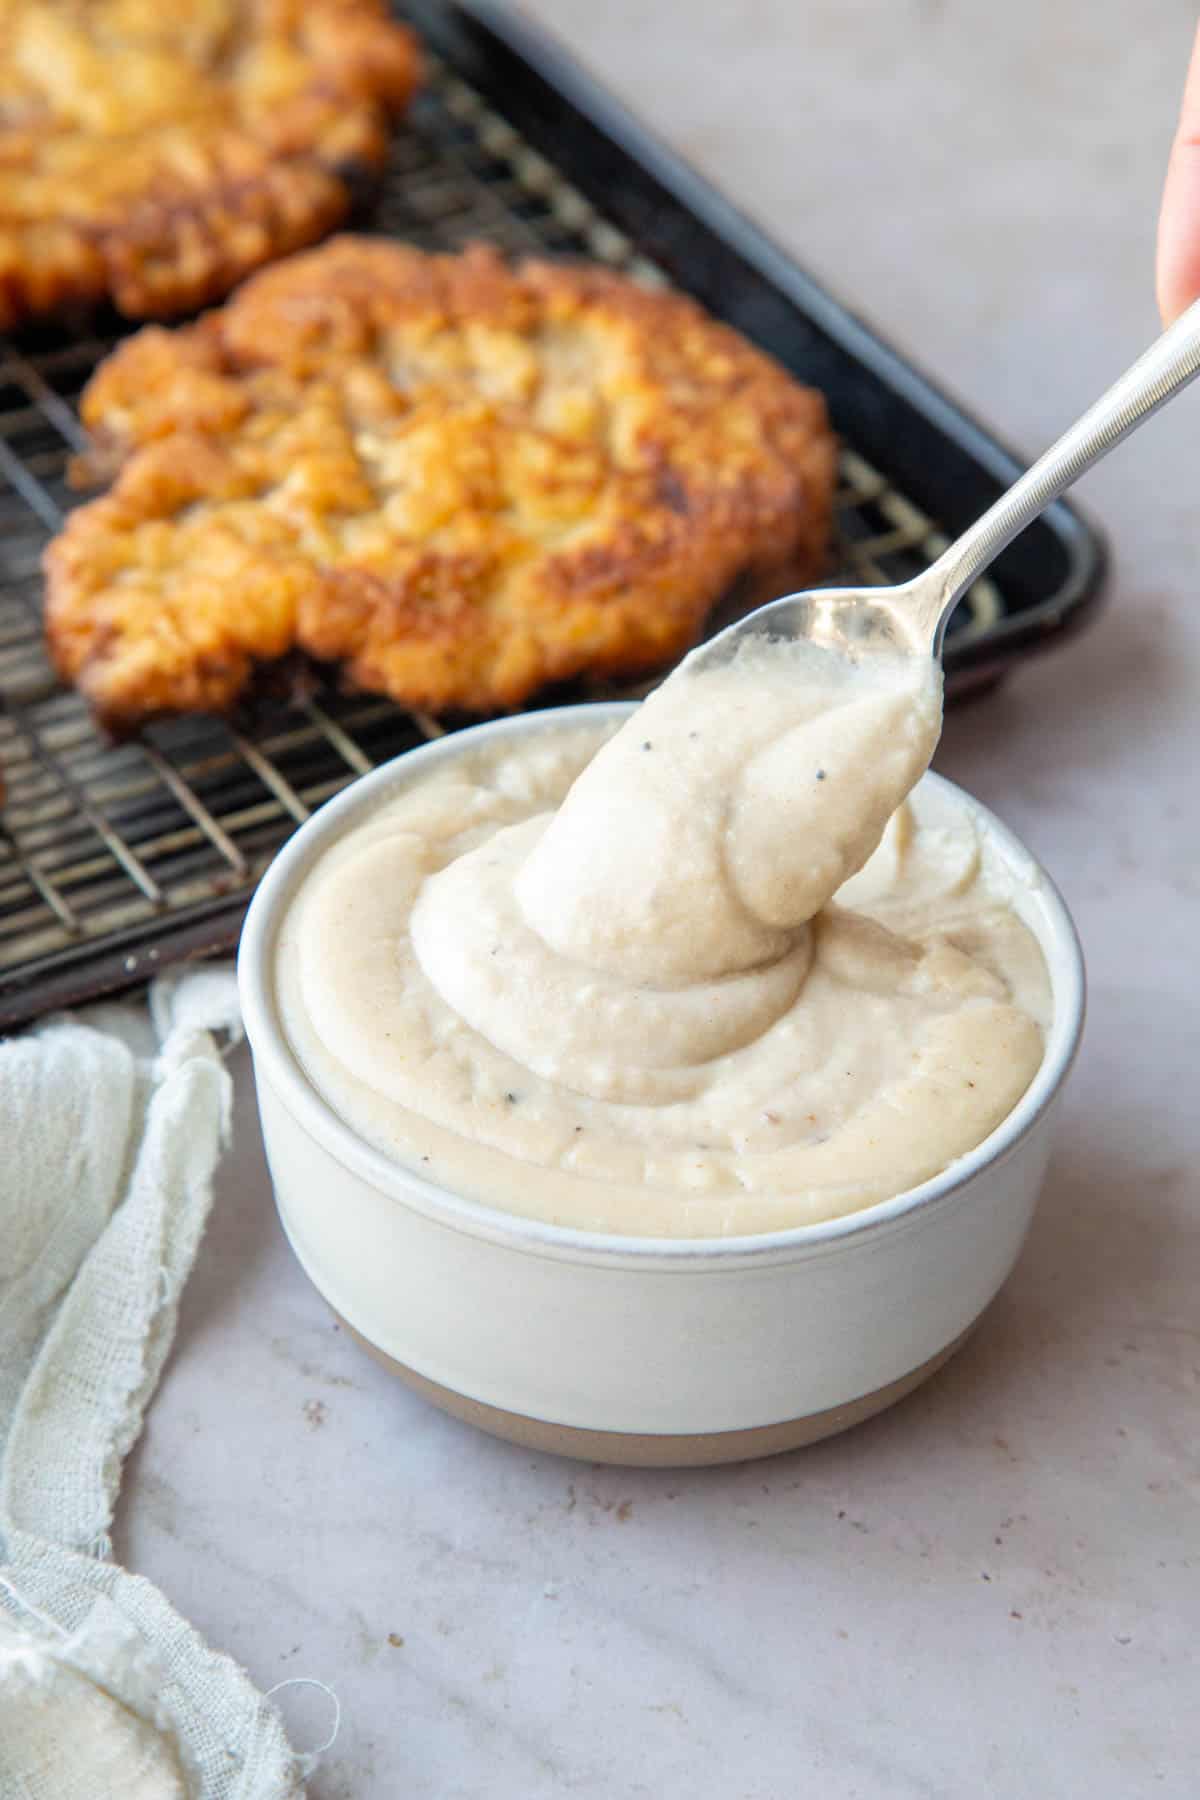 a spoon holding a spoonful of white gravy in front of a sheet pan of chicken fried steak.